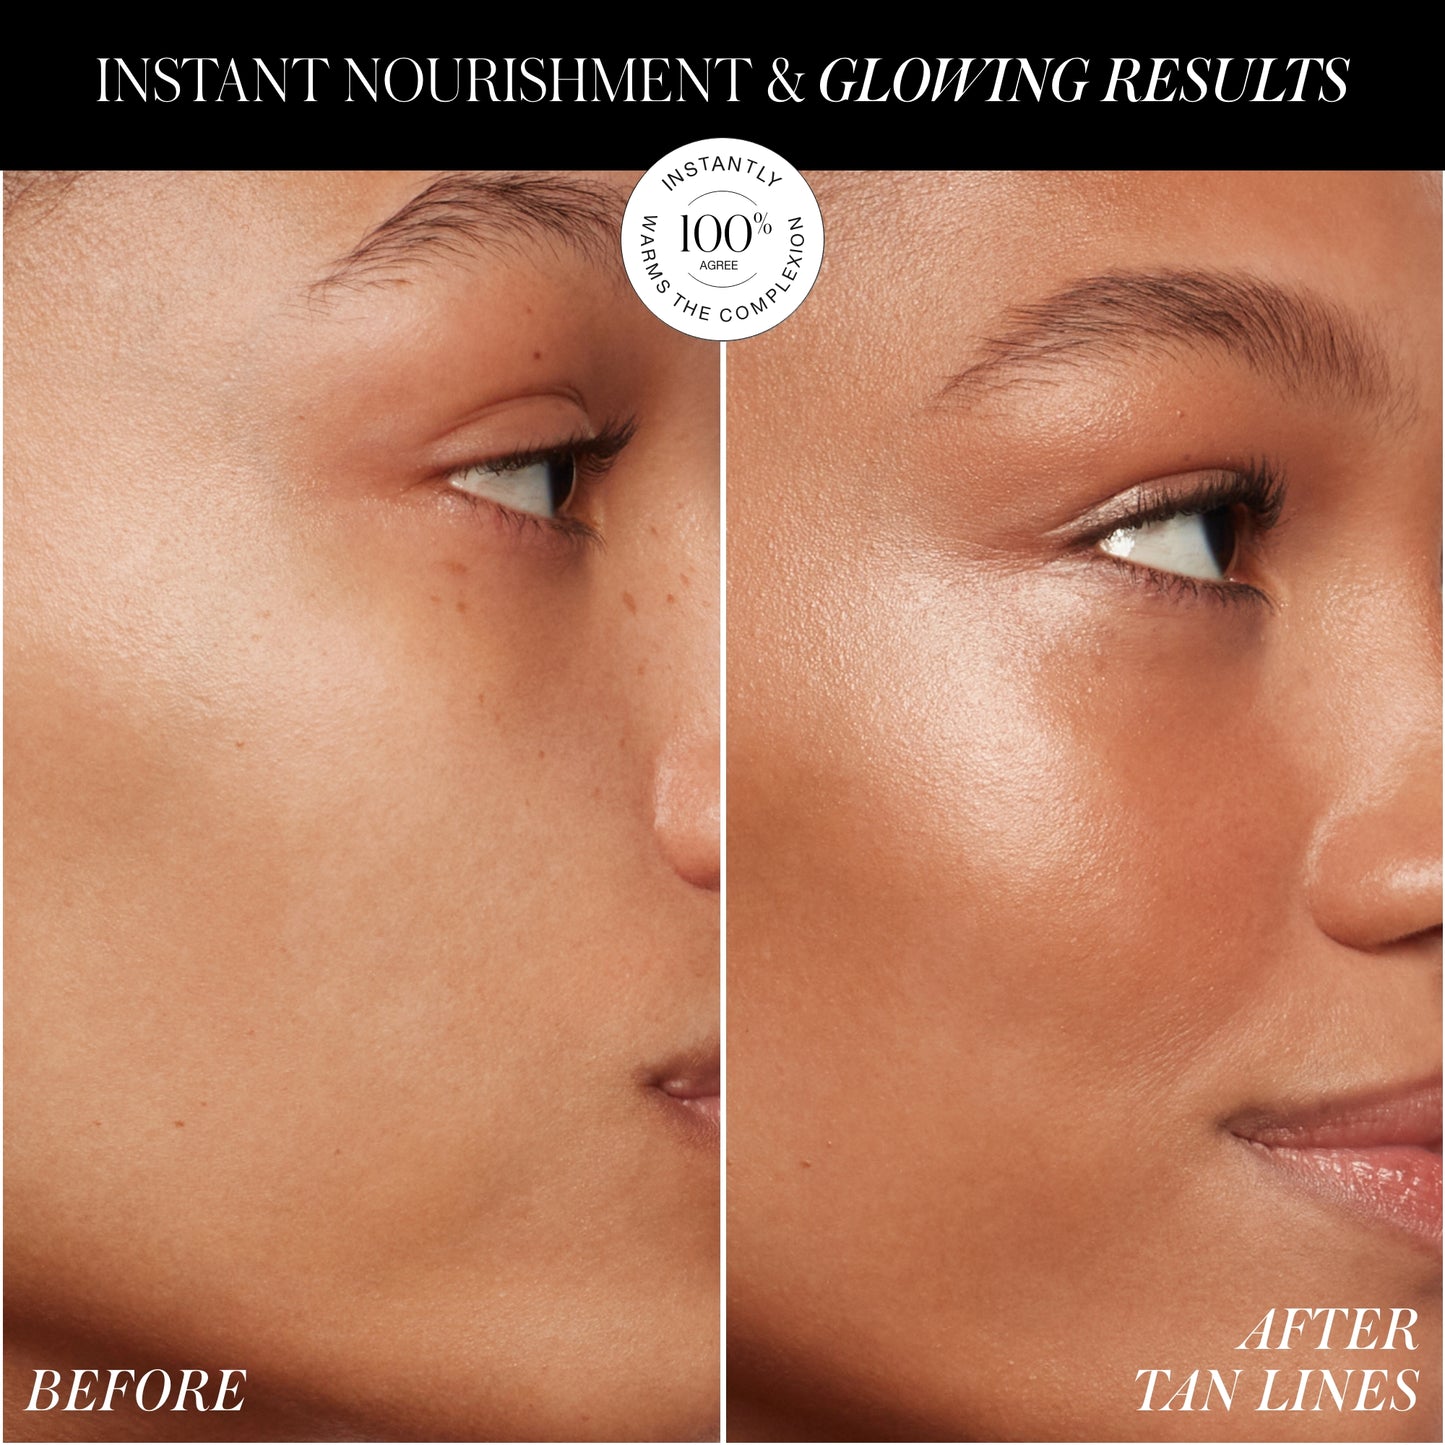 RMS BEAUTY ReDimension Hydra Bronzer tan lines